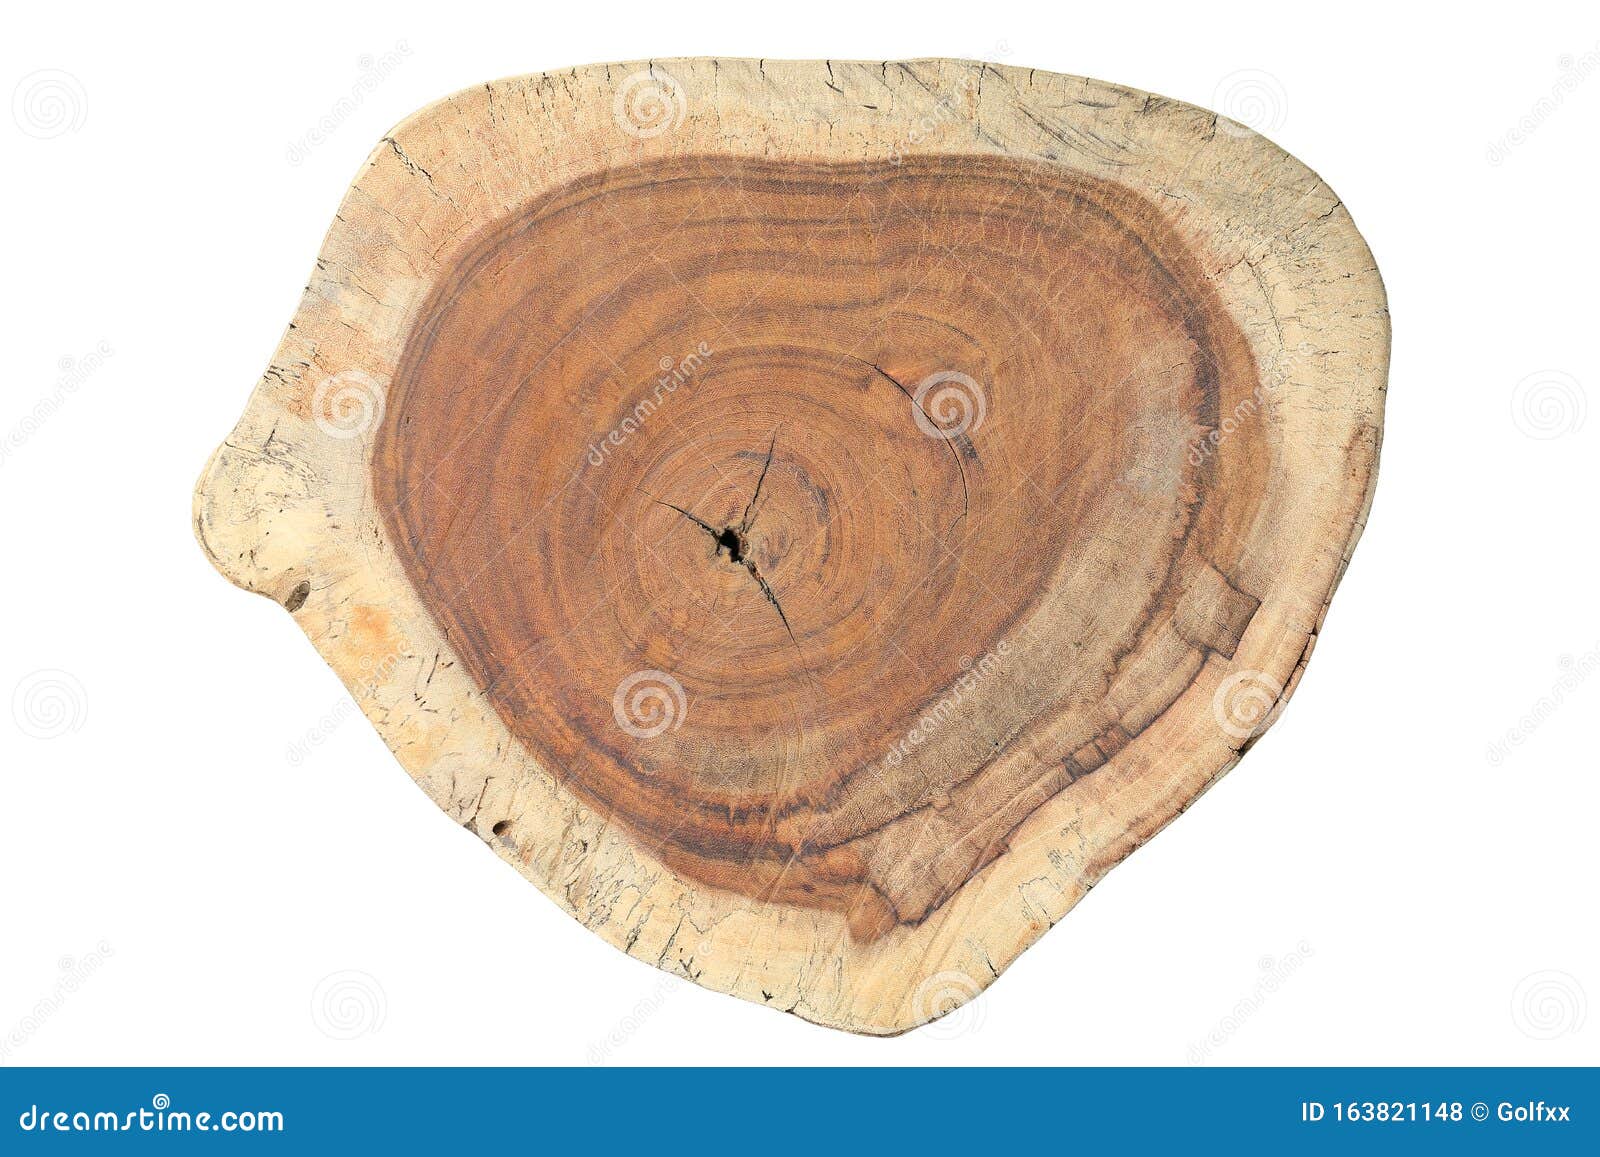 Cross-section Cherry Image & Photo (Free Trial) | Bigstock